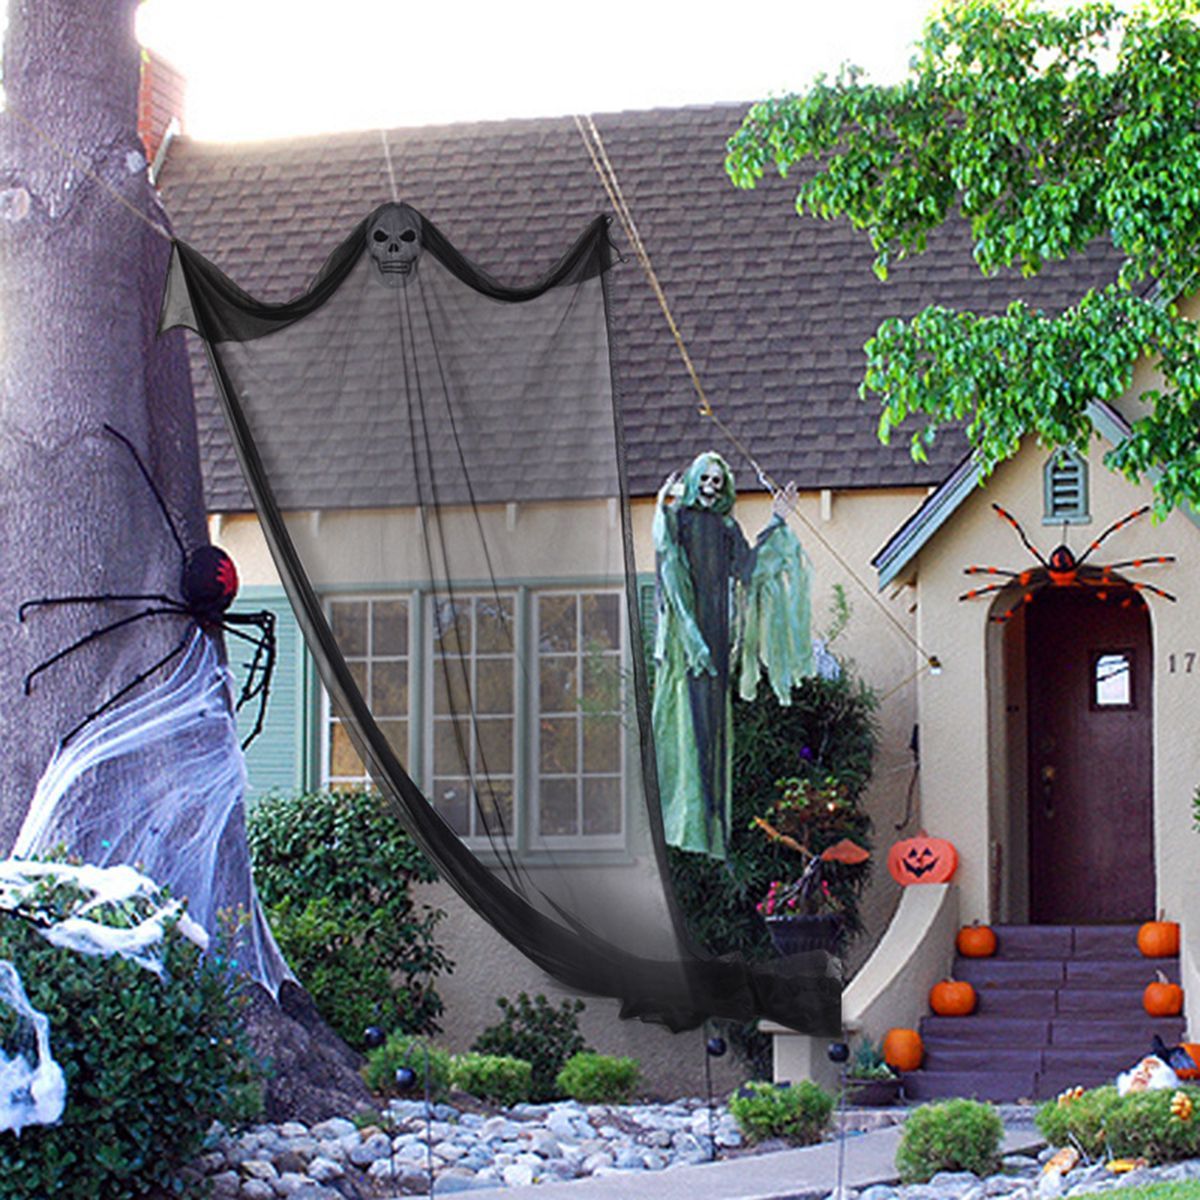 Halloween-Ghost-Decoration-Party-Hanging-Scary-Haunted-House-Prop-Indoor-Outdoor-1731519